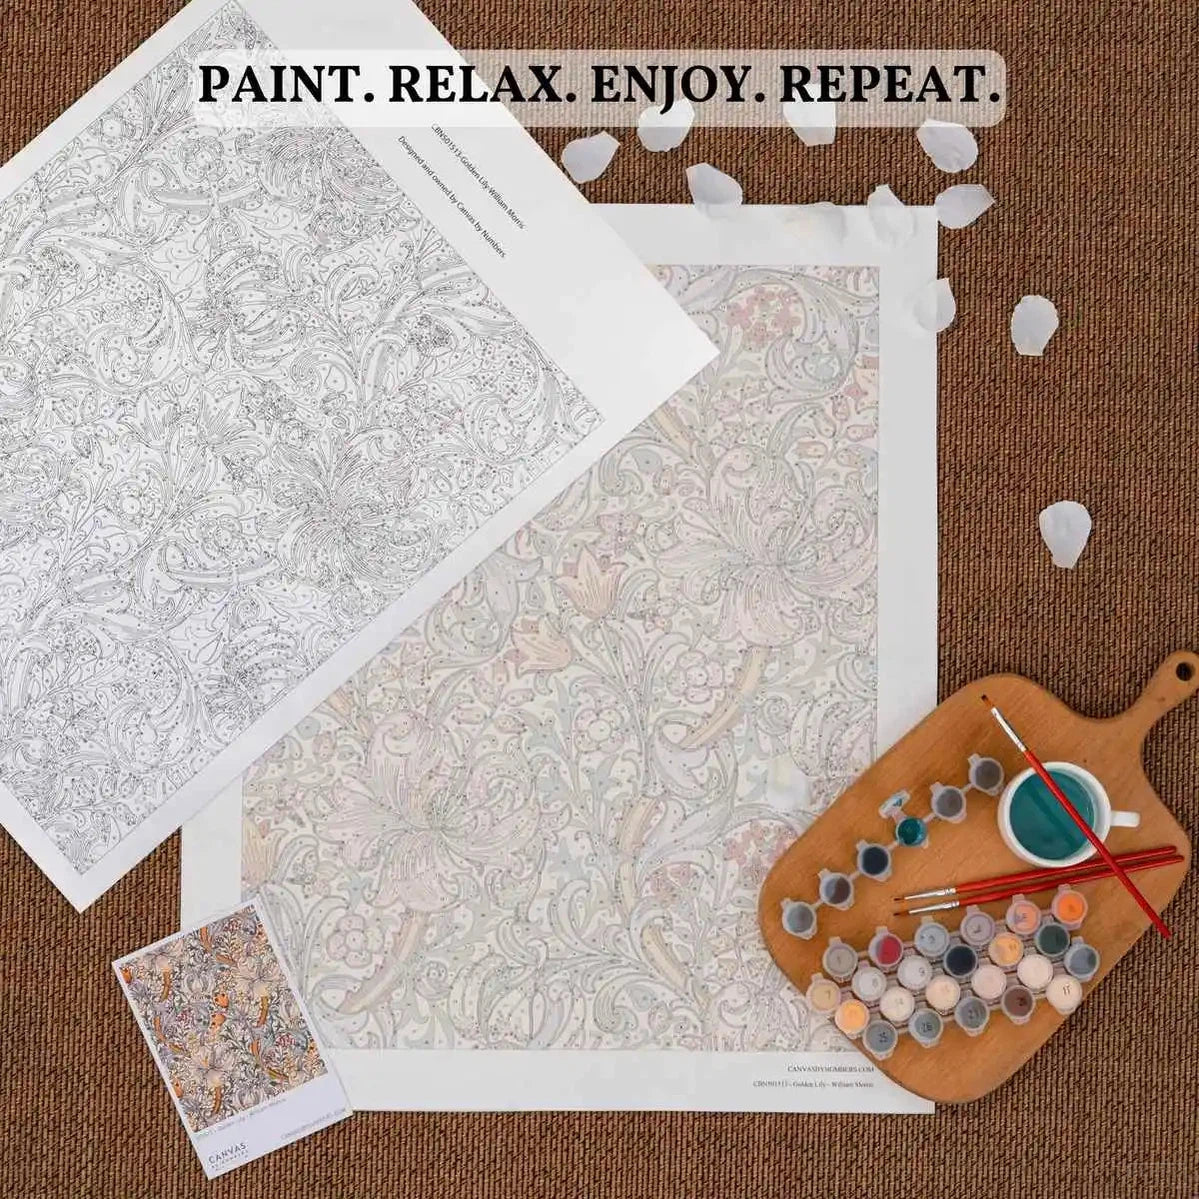 With Presents for All - Paint by Numbers-Start planning your Christmas decor with this fun paint by numbers kit. A snowman family, with colorful ornaments to get in the holiday spirit.-Canvas by Numbers